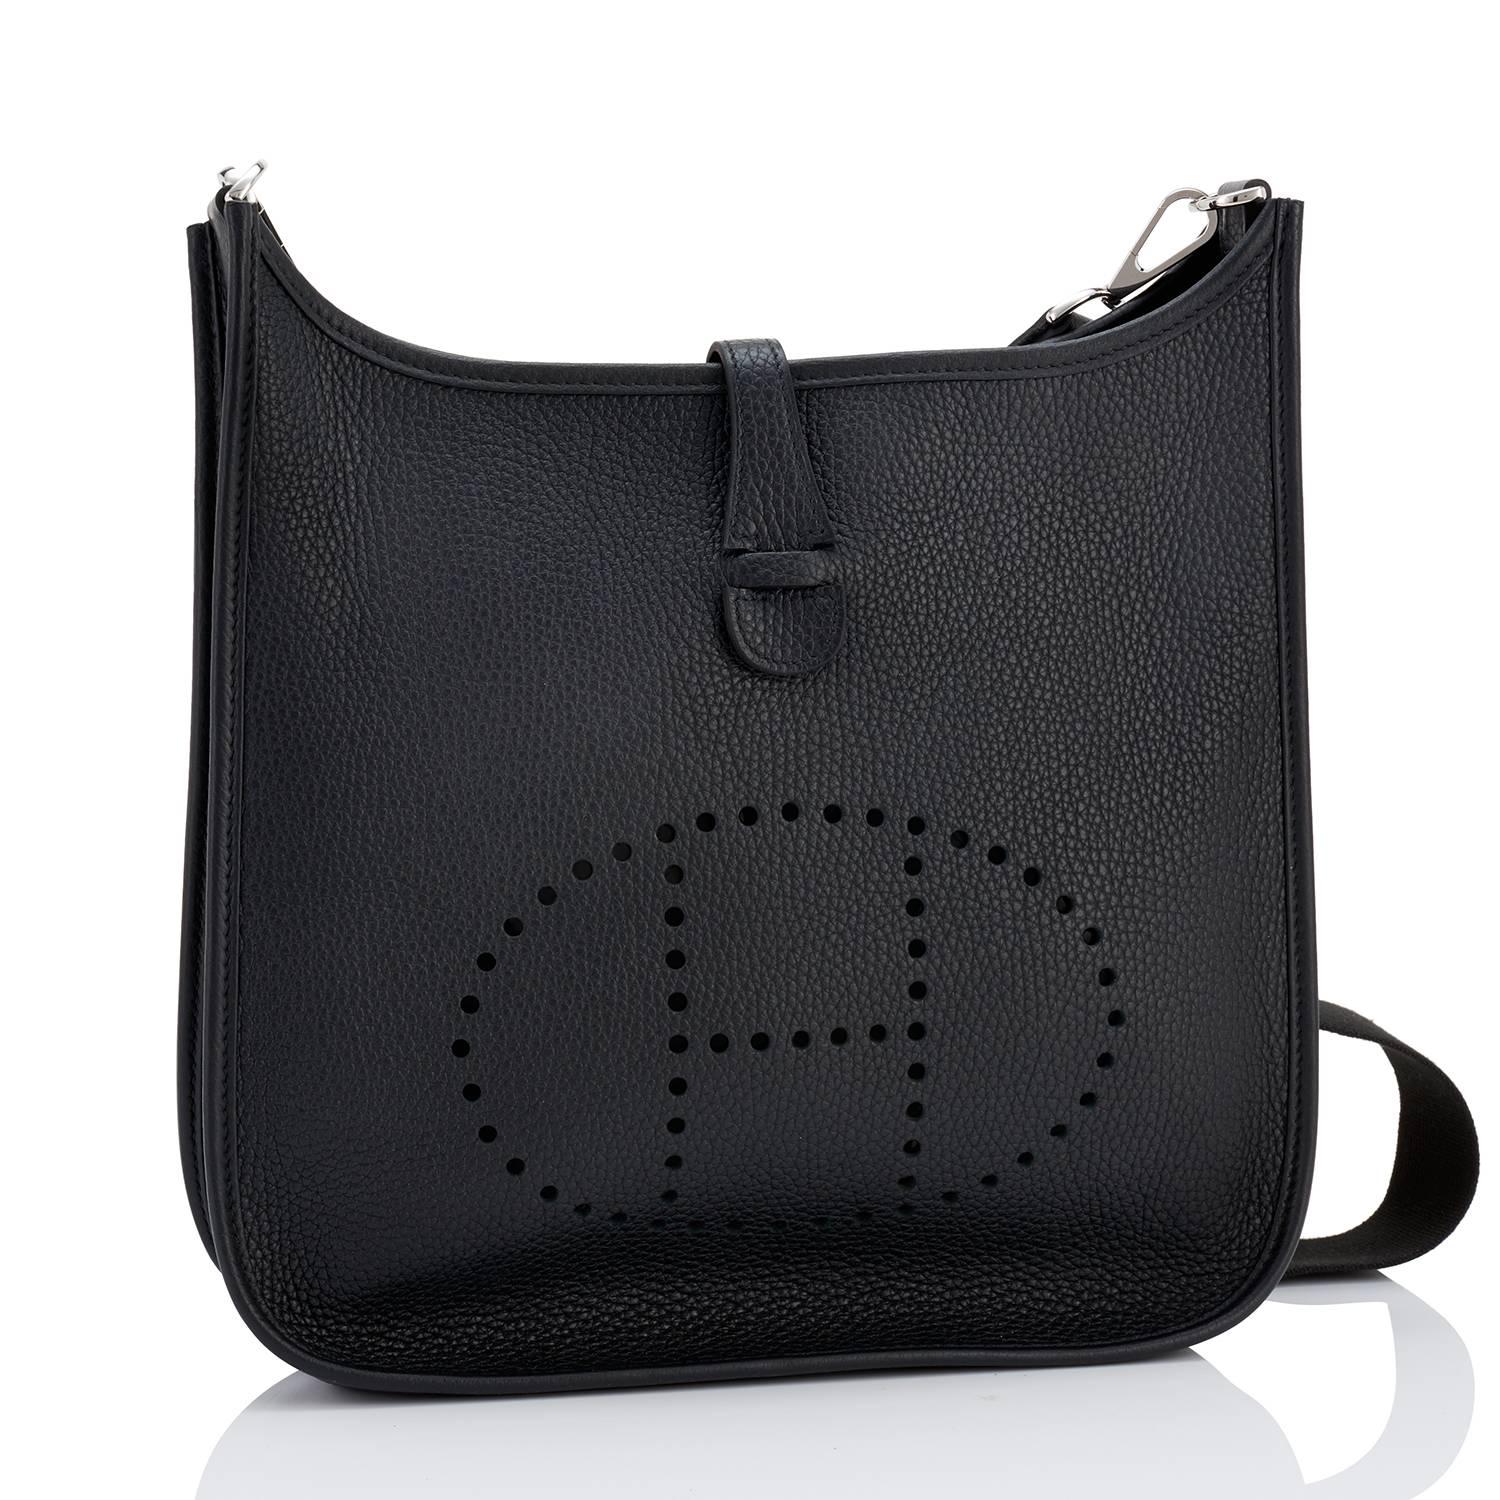 Hermes Black Evelyne PM Cross-Body Messenger Bag Chic
Brand New in Box. Pristine condition.
Just purchased from Hermes store.  Perfect gift! Comes with with Hermes sleepers and box.
This is the iconic Hermes workhorse cross-body messenger Evelyne